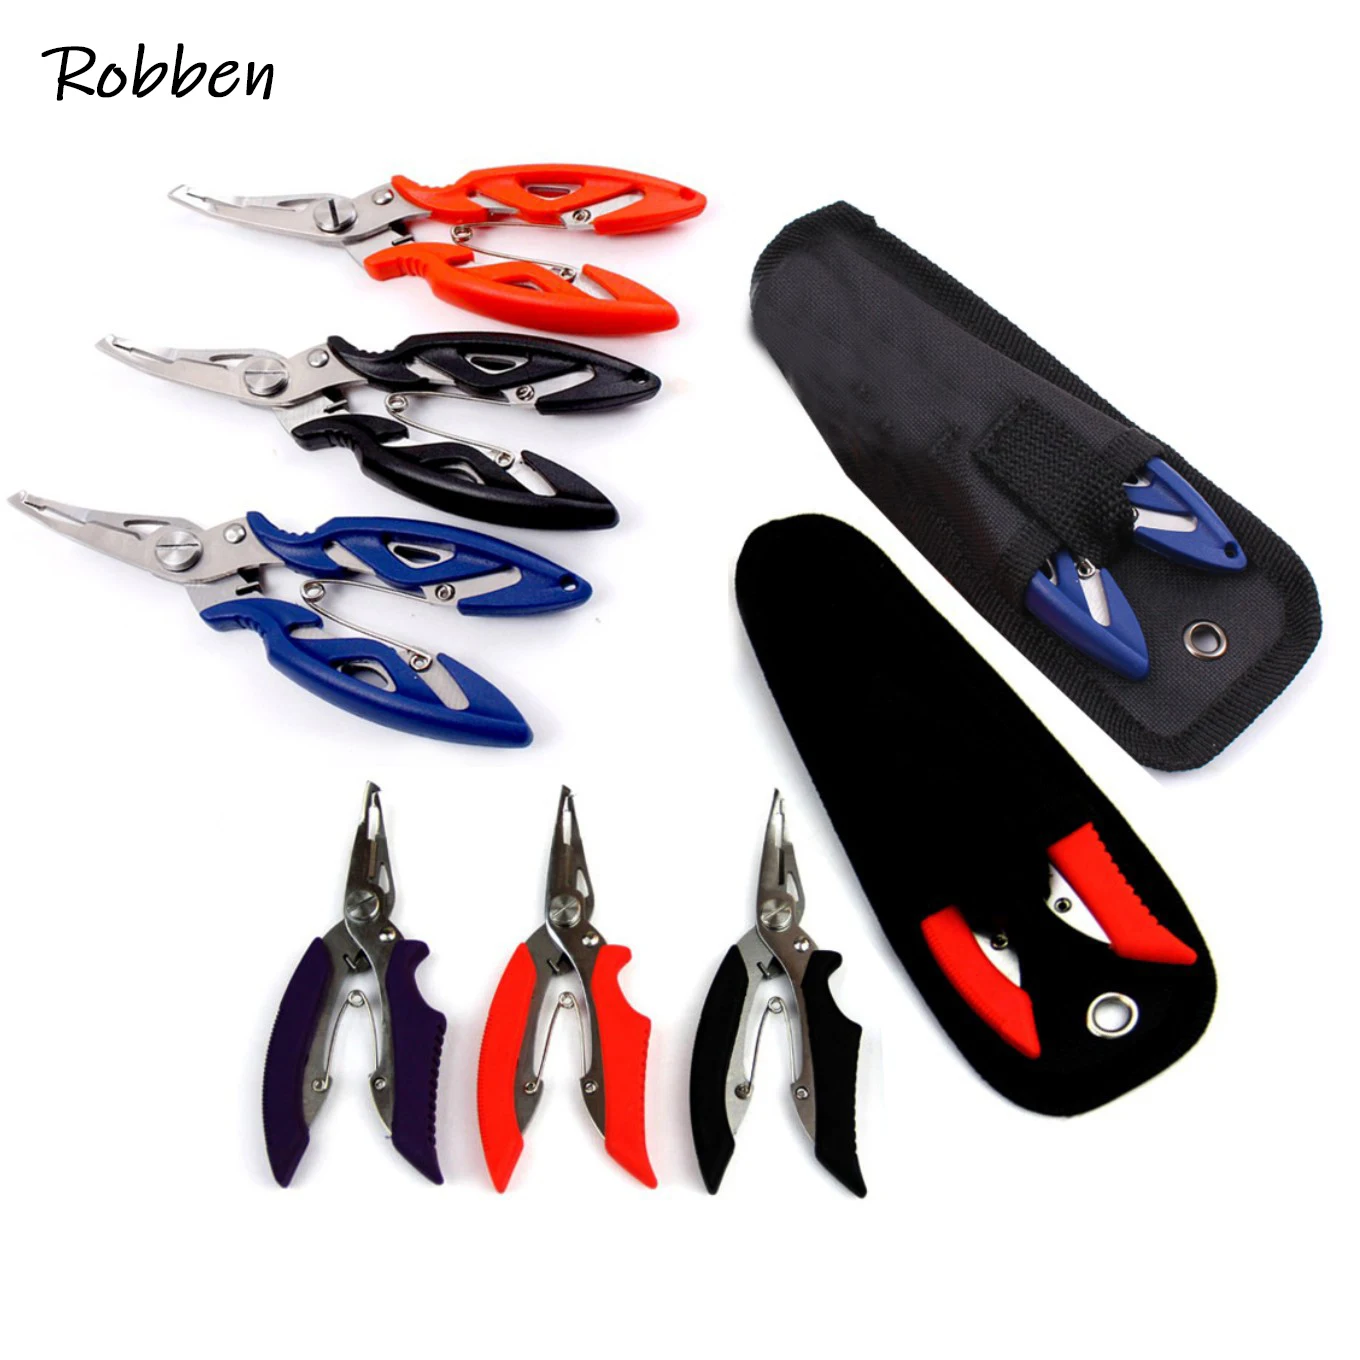 

JETSHARK Wholesale 13cm Stainless Steel Fishing Cutting Pliers Carp Fishing Tackle